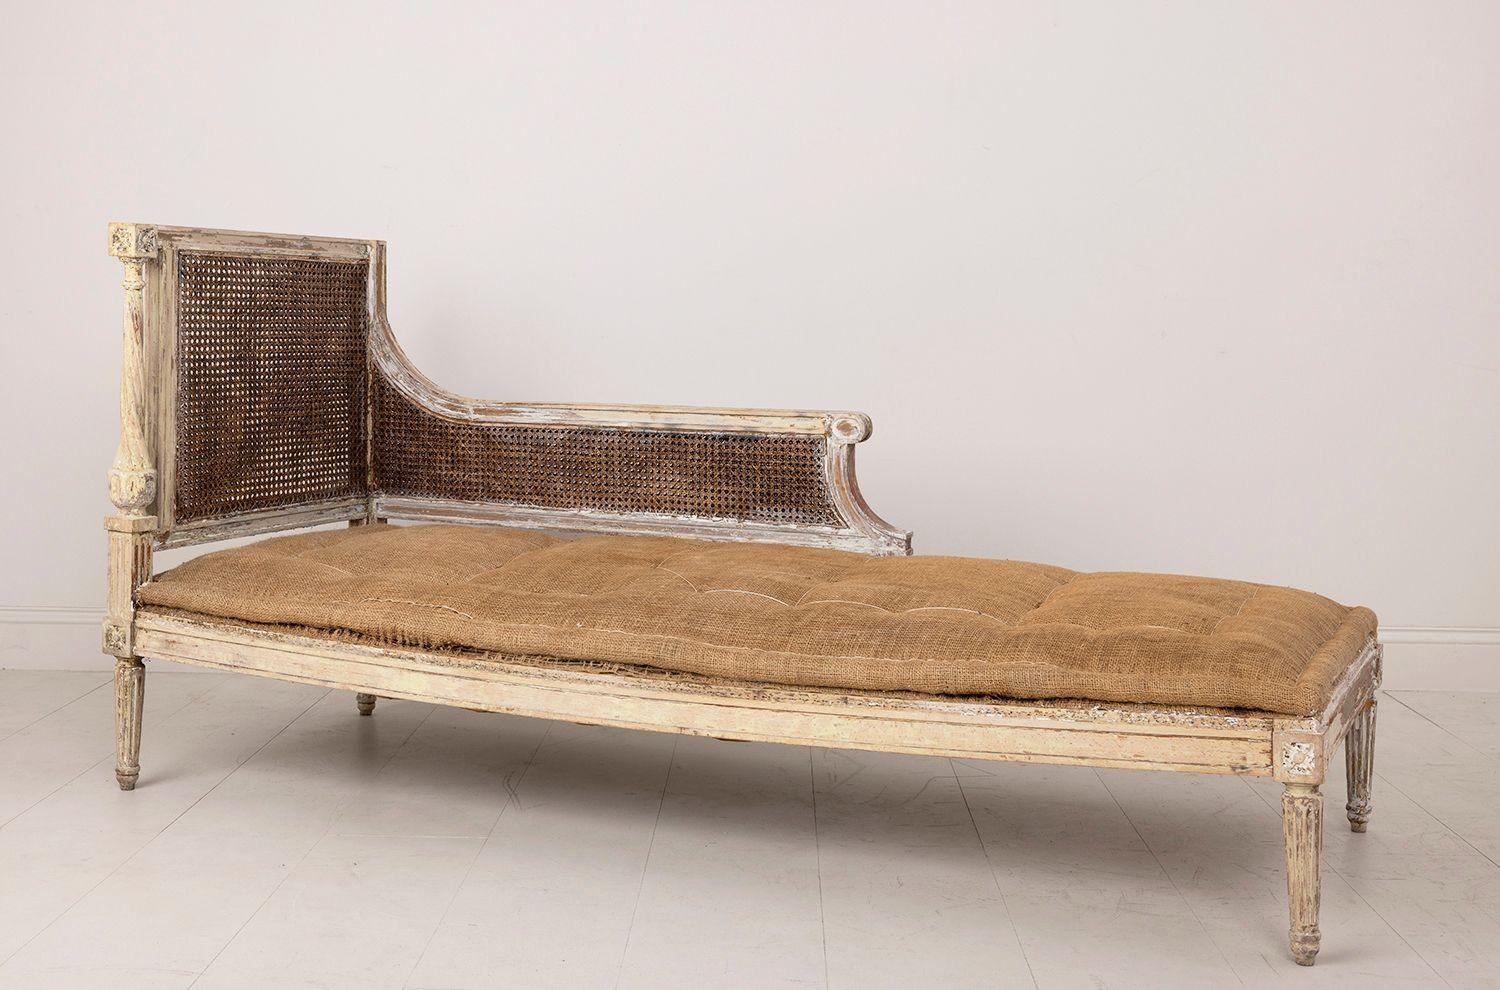 A 19th c. French chaise lounge or daybed in the Louis XVI style with original caned back and side. This piece is wearing old paint with traces of original gilt. The backside of the caning is painted. The seat material shown in the images has been